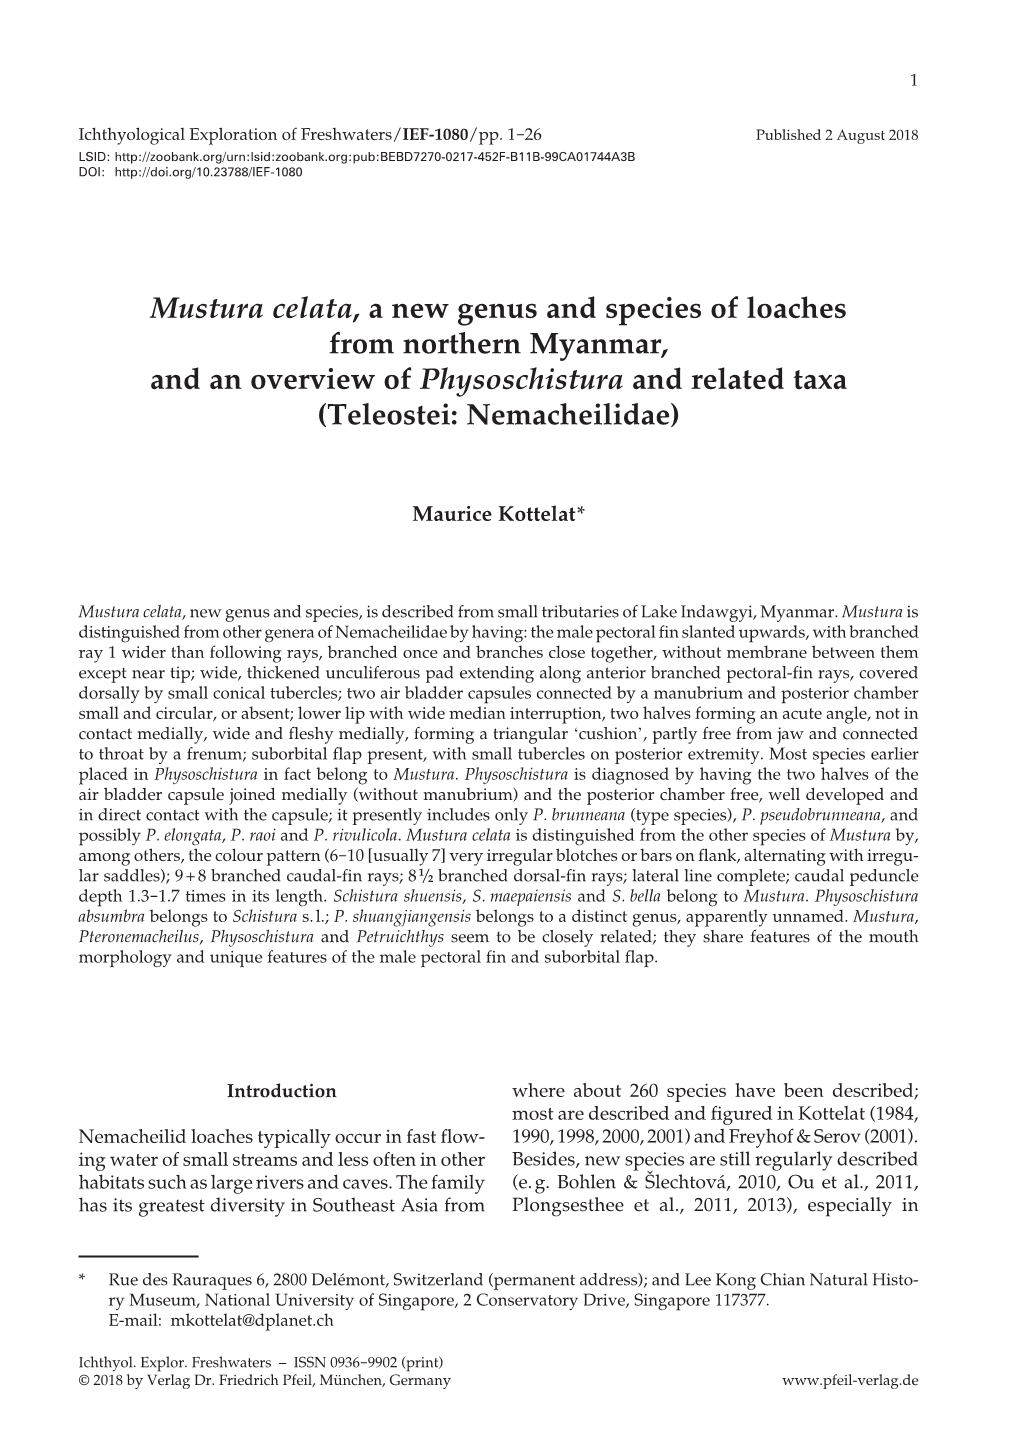 Mustura Celata, a New Genus and Species of Loaches from Northern Myanmar, and an Overview of Physoschistura and Related Taxa (Teleostei: Nemacheilidae)